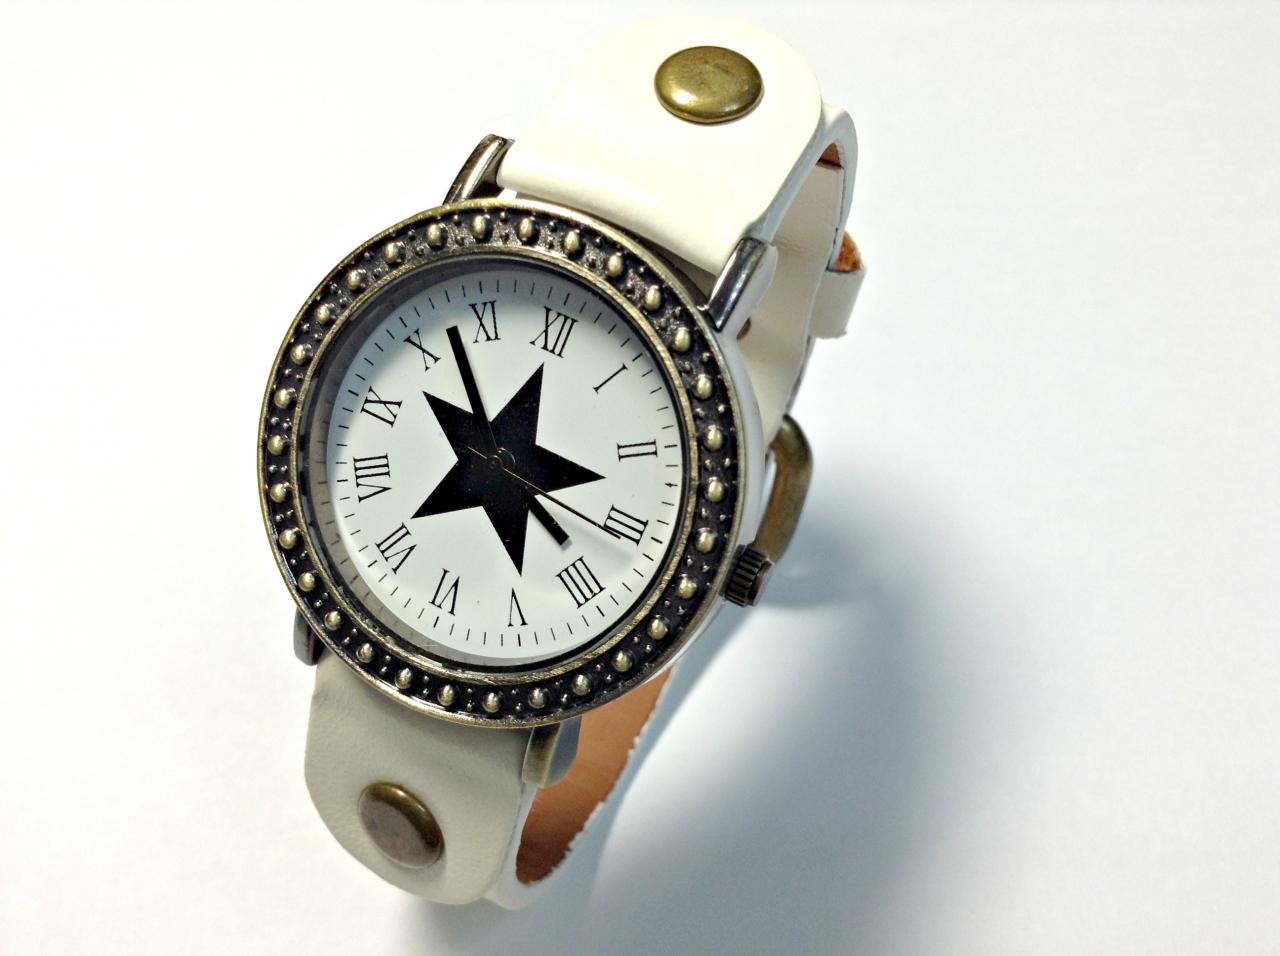 Star Face Vintage Leather Band Watches Woman Girl Quartz Wrist Watch White